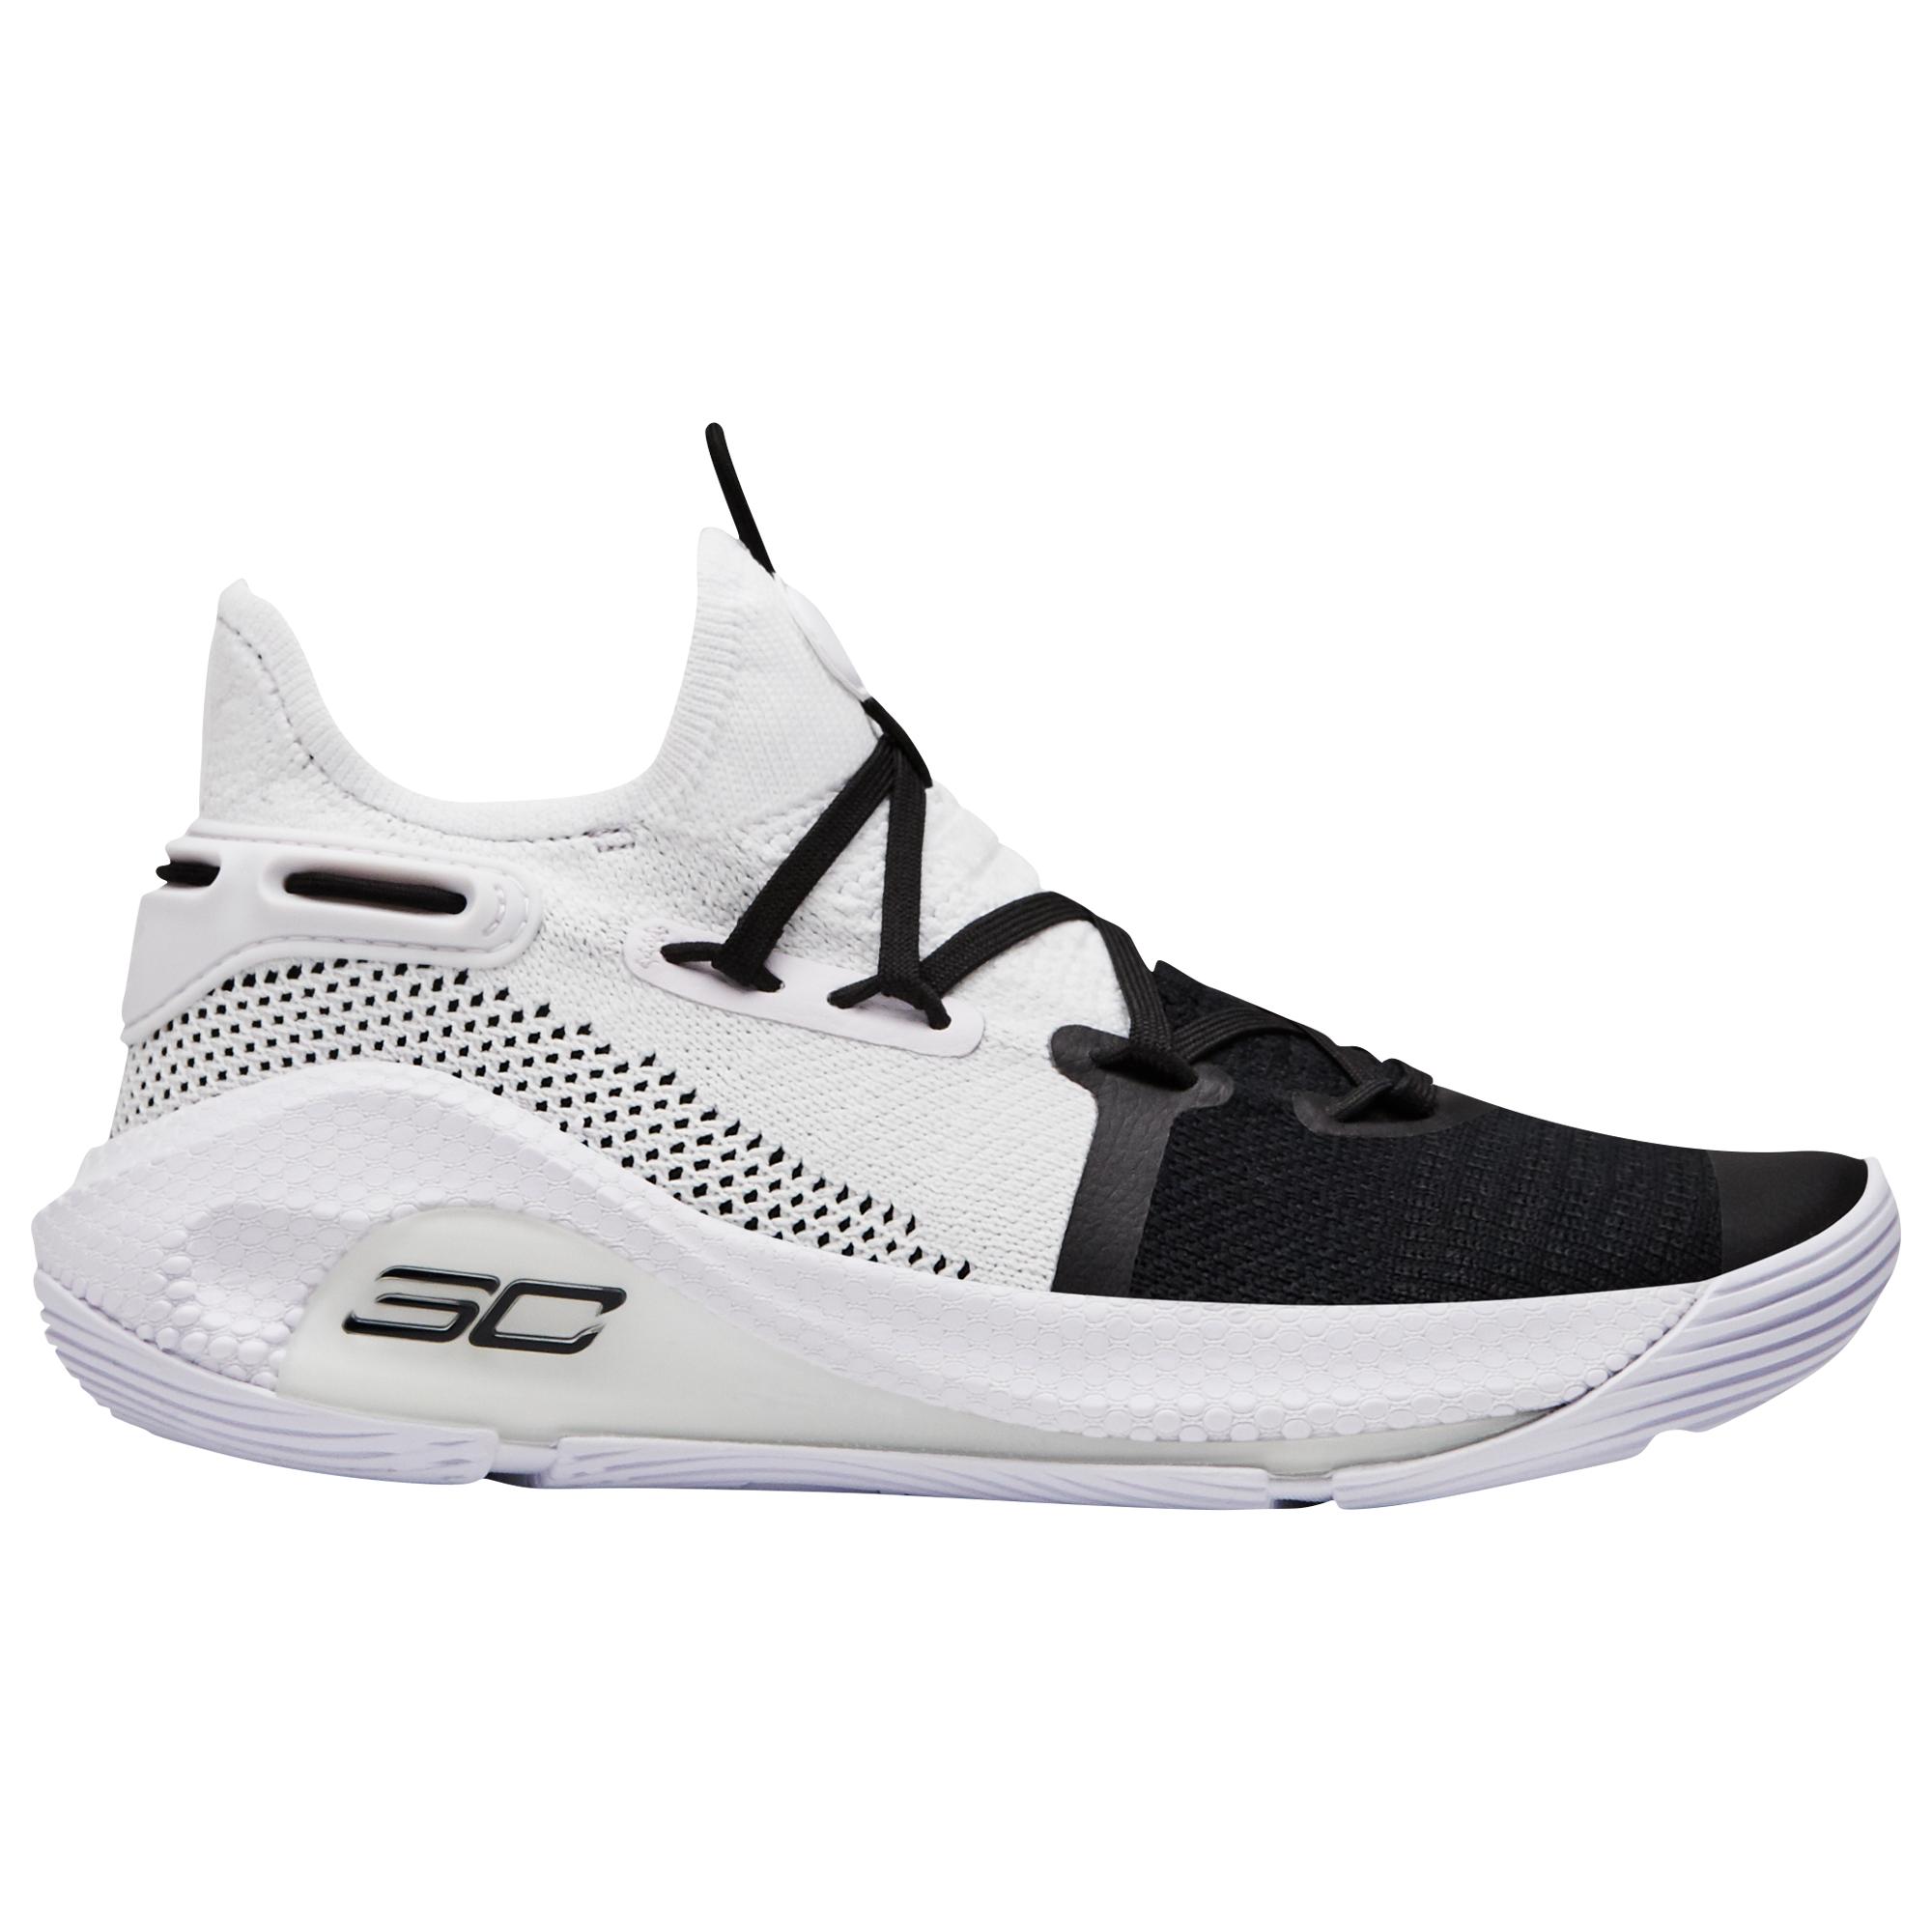 Under Armour Rubber Curry 6 Basketball 